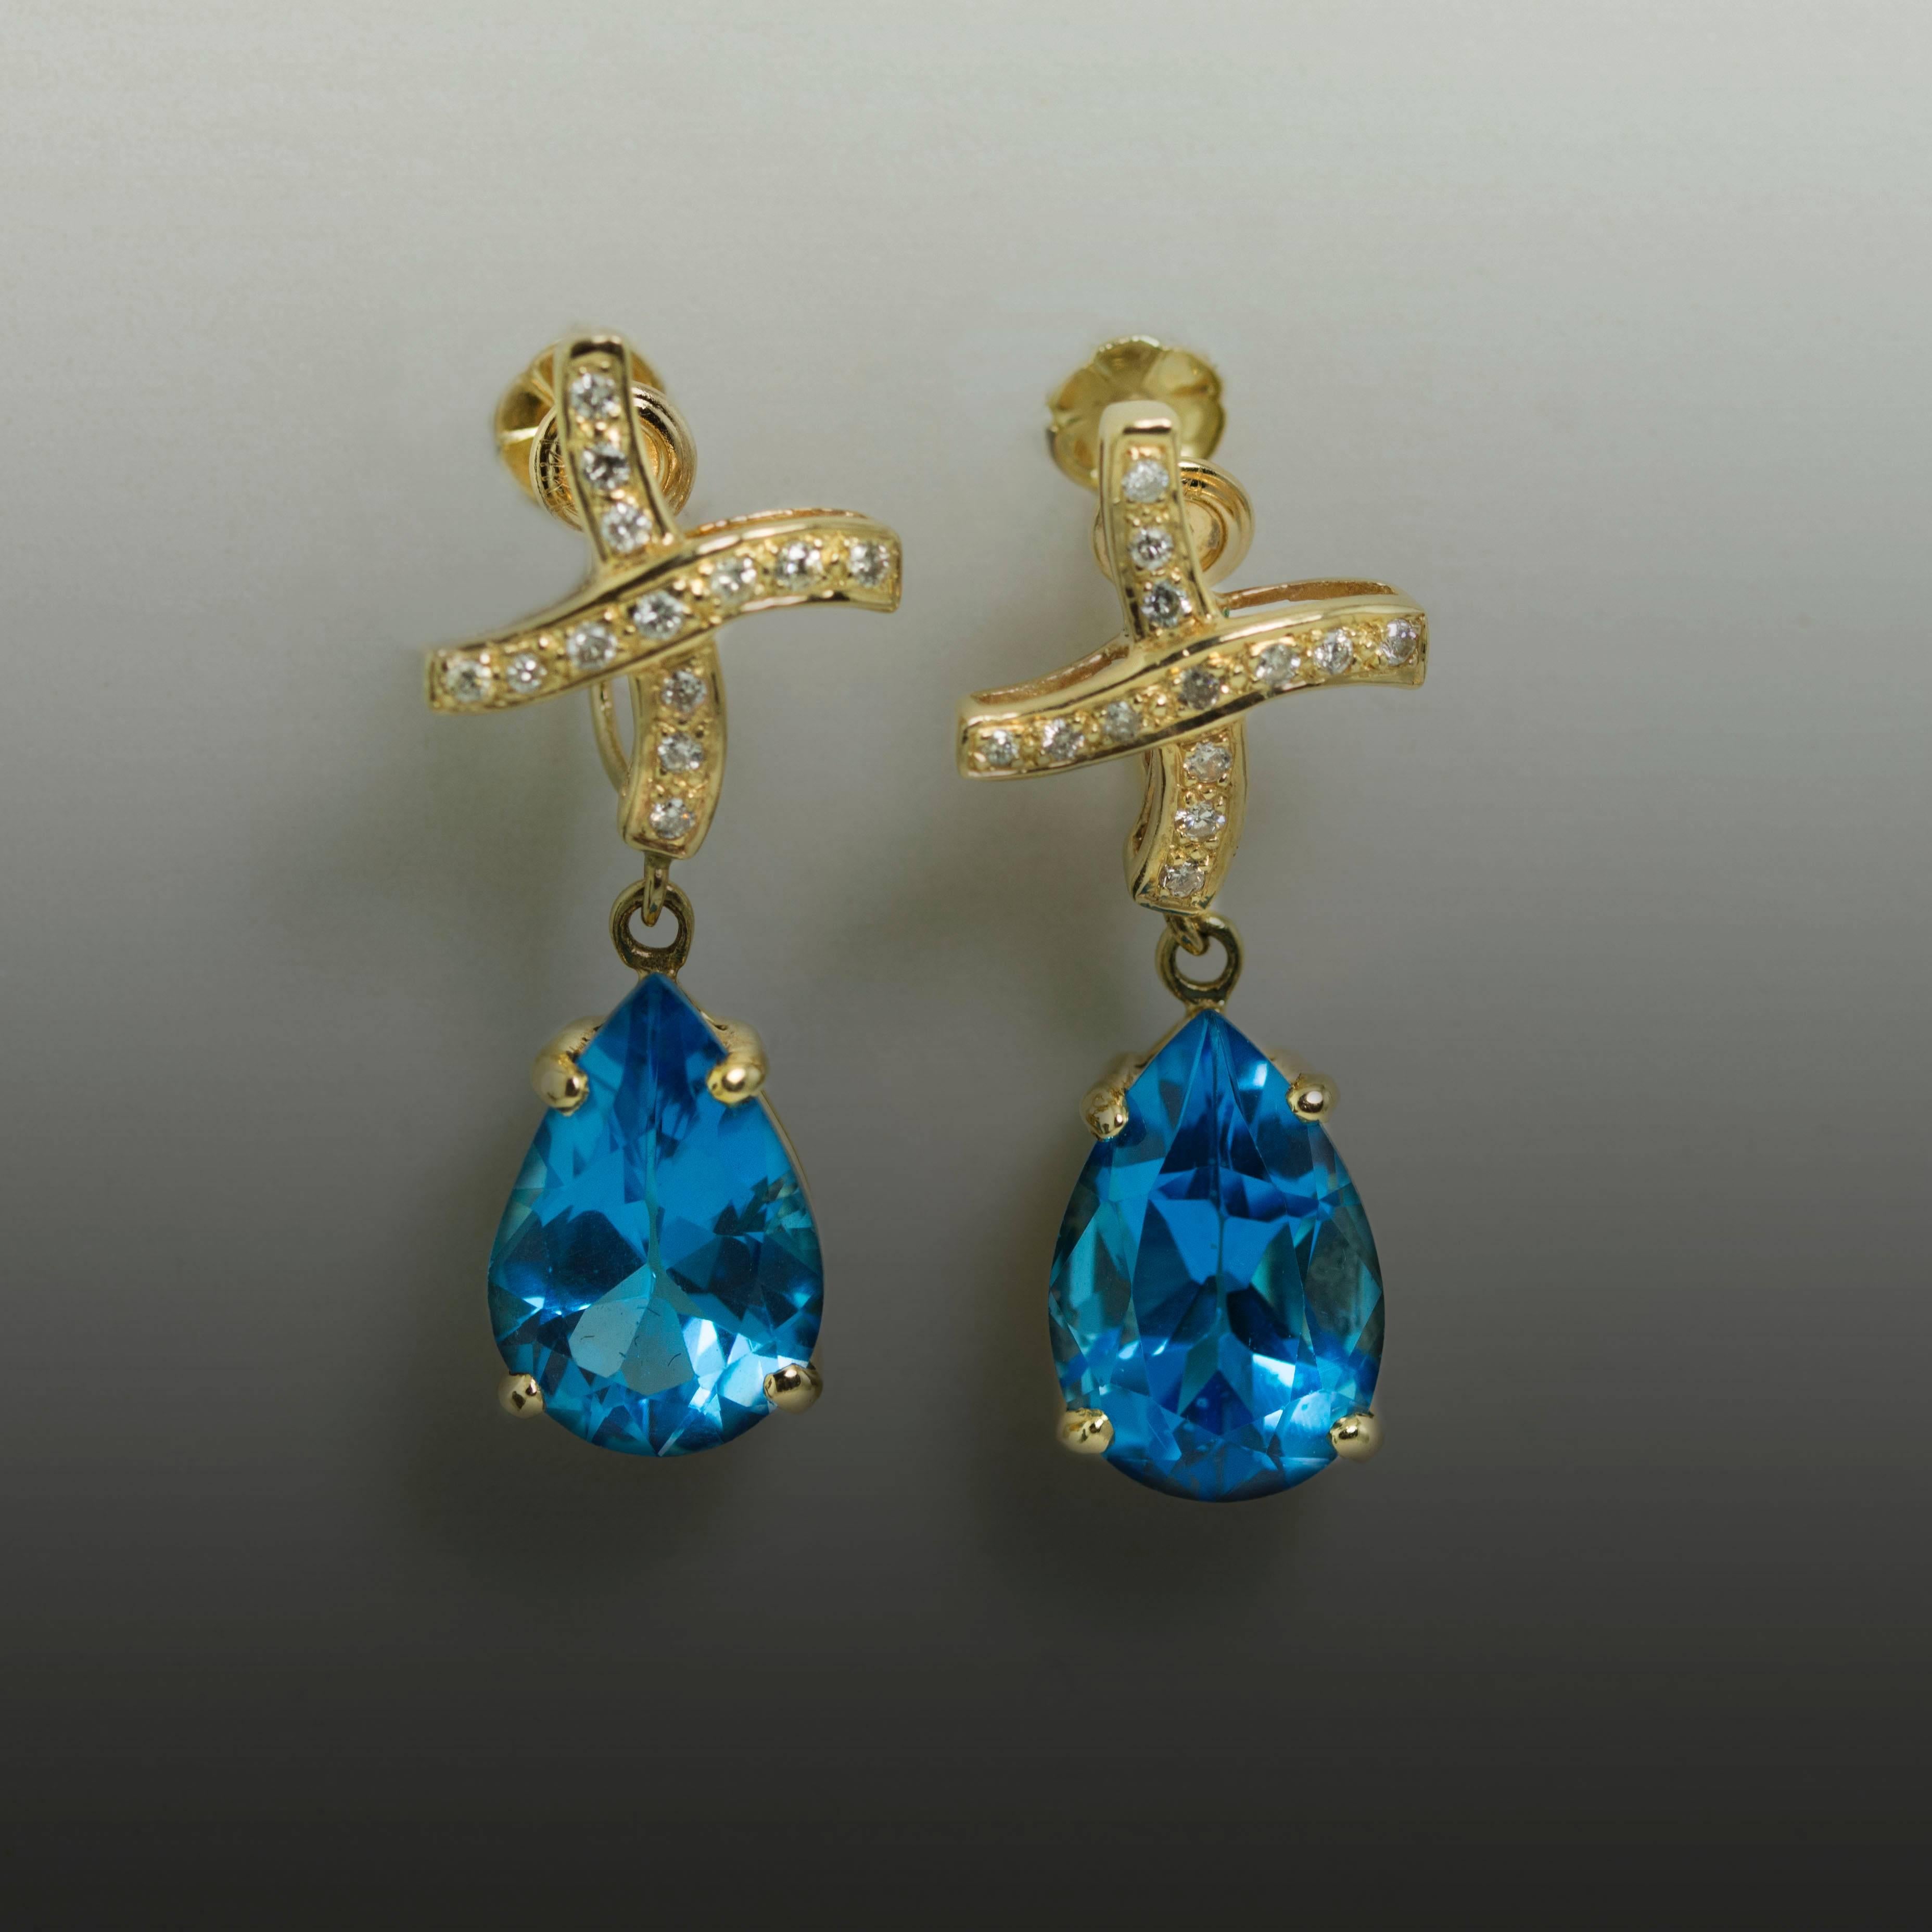 Beautiful 14K Earrings with 2 Pear Shaped Blue Topaz Weighing 13.06 Carats with 26 Round Diamonds Weighing 0.21 Carats. 